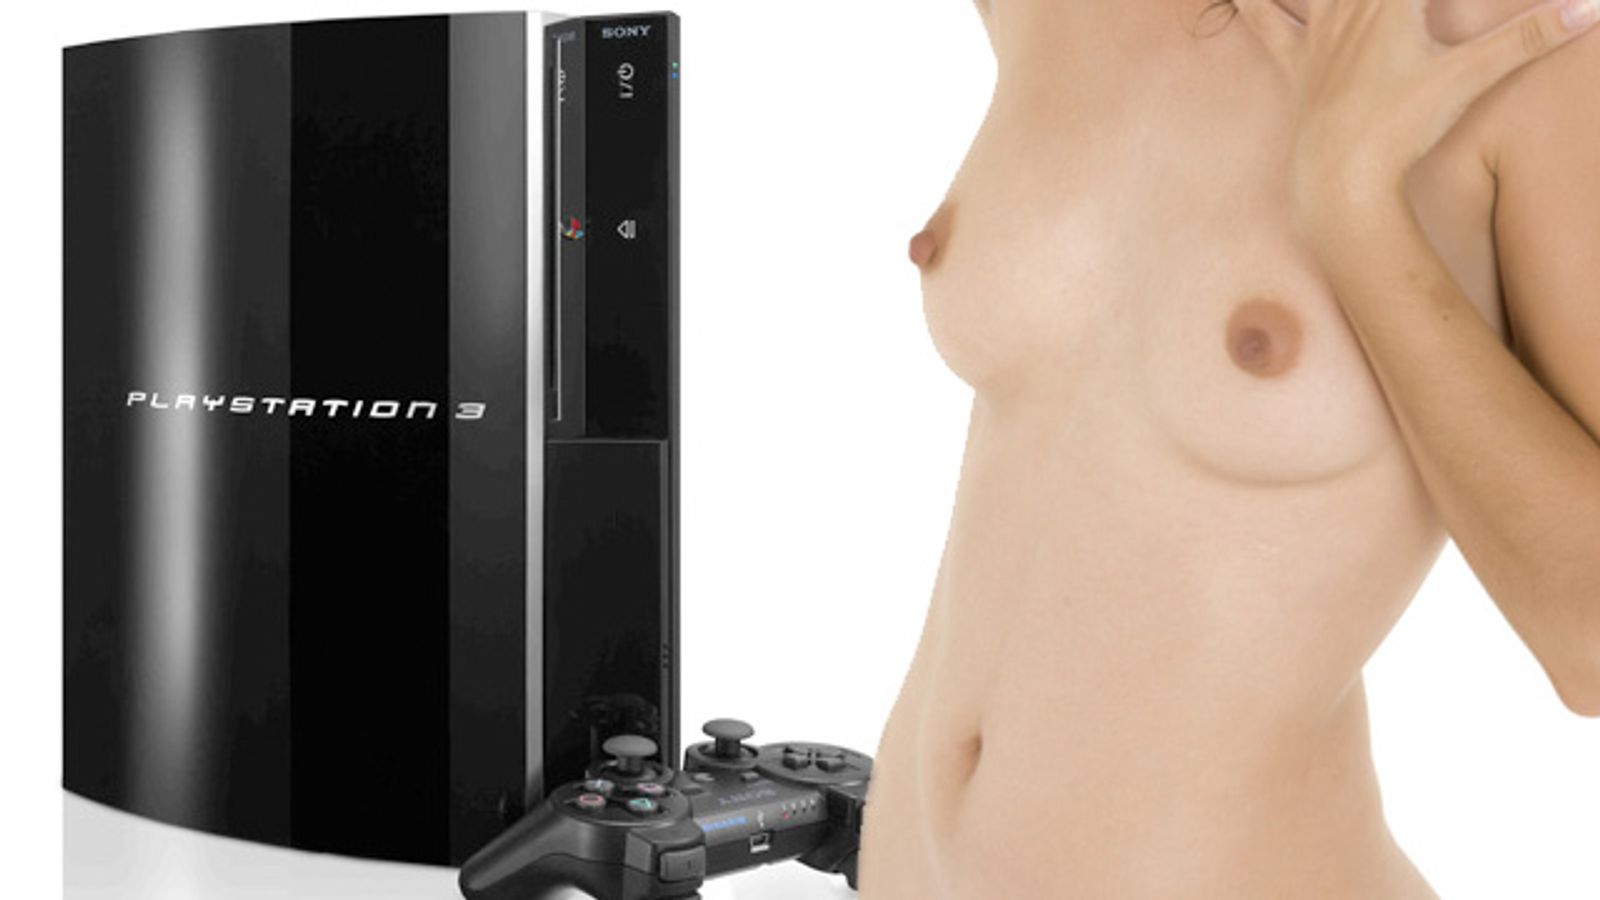 Japan's PS3 is Porn-Friendly